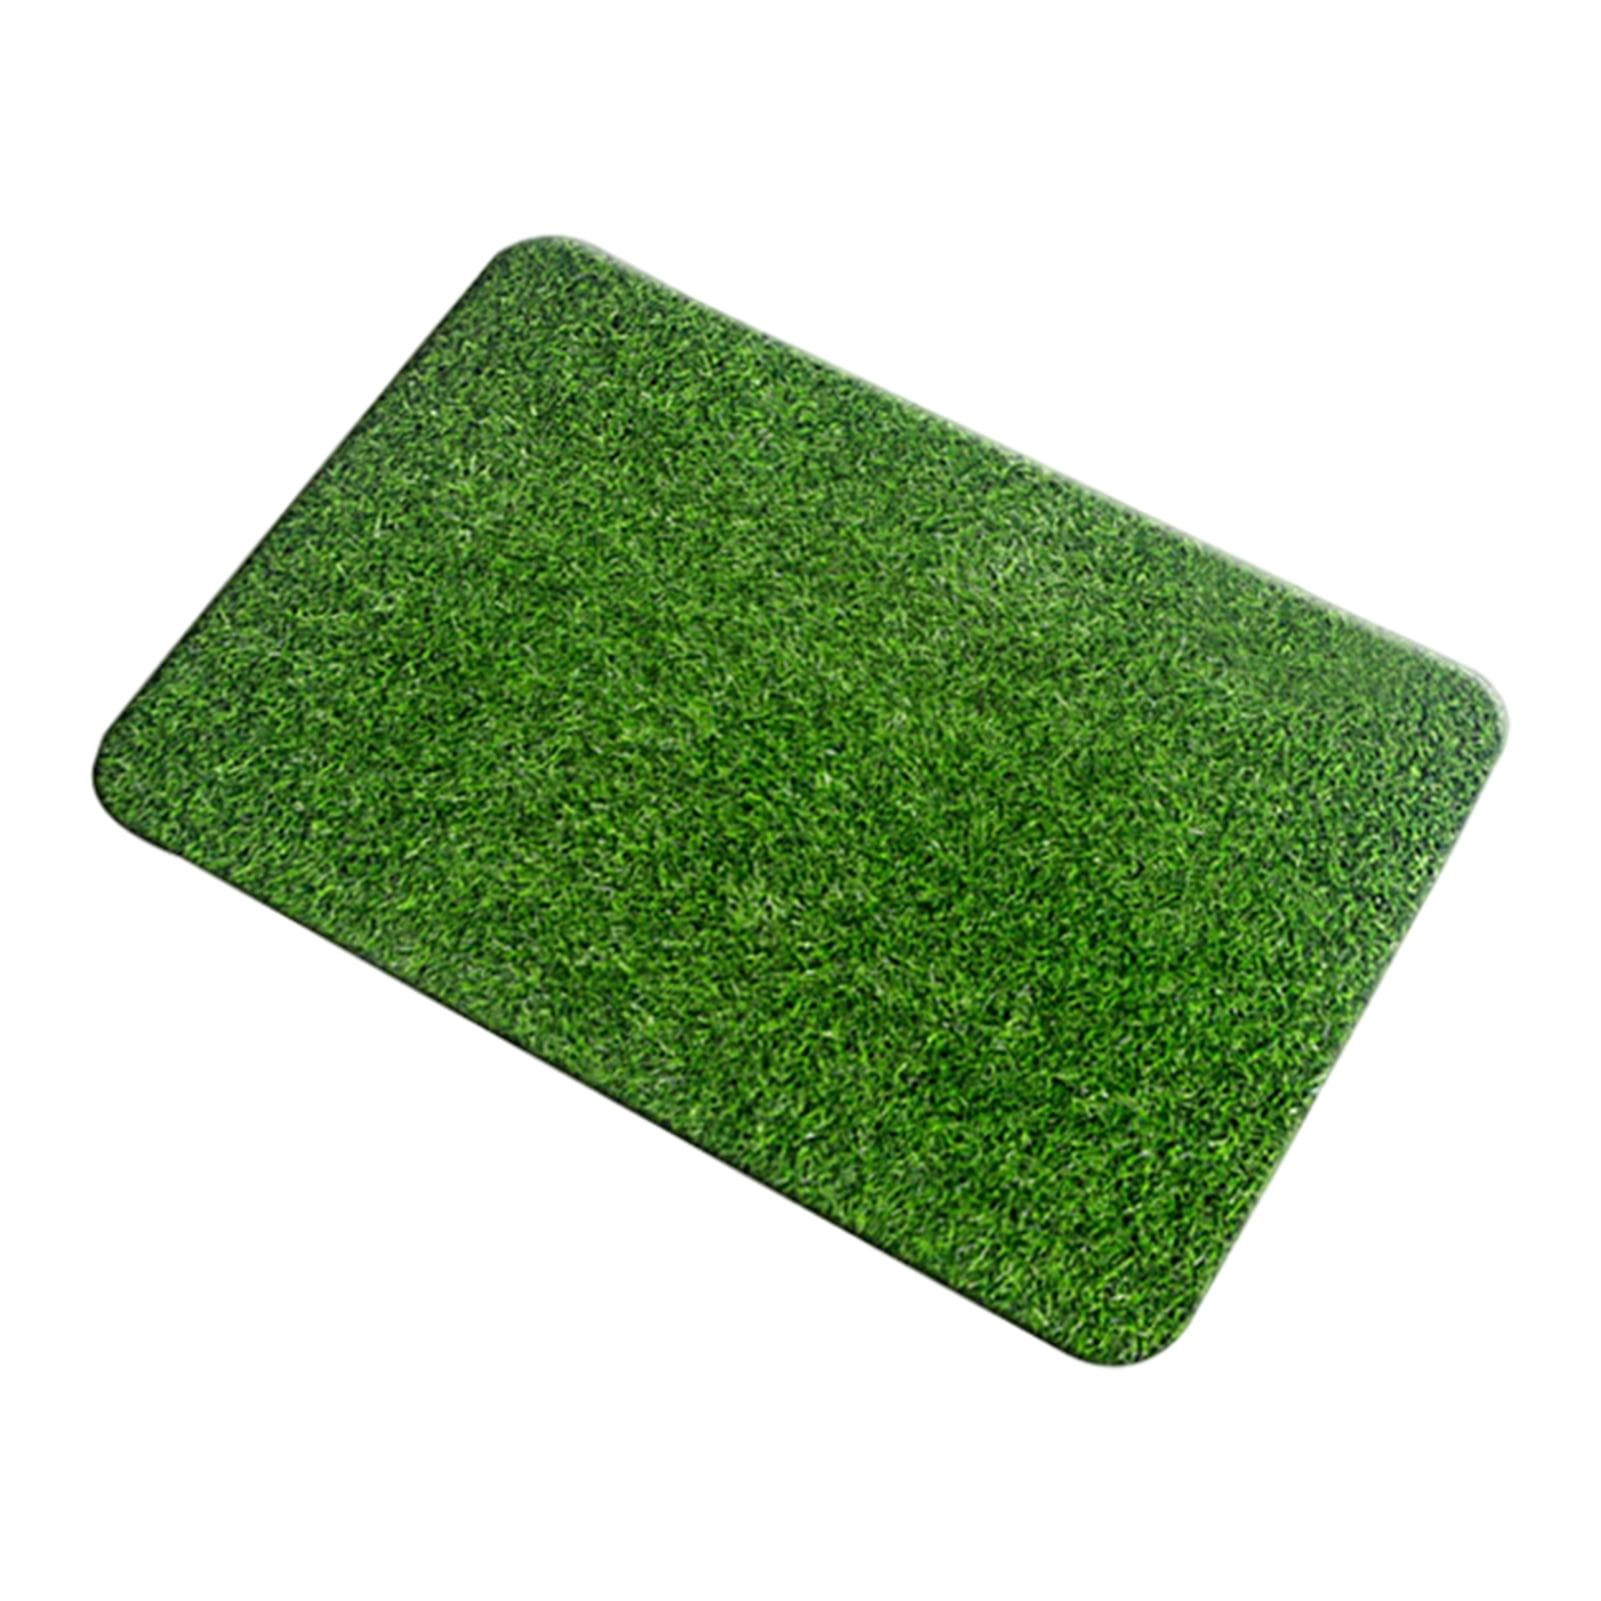 New Artificial Grass Lawn Synthetic Turf Landscape Indoor Outdoor 19.68'' 